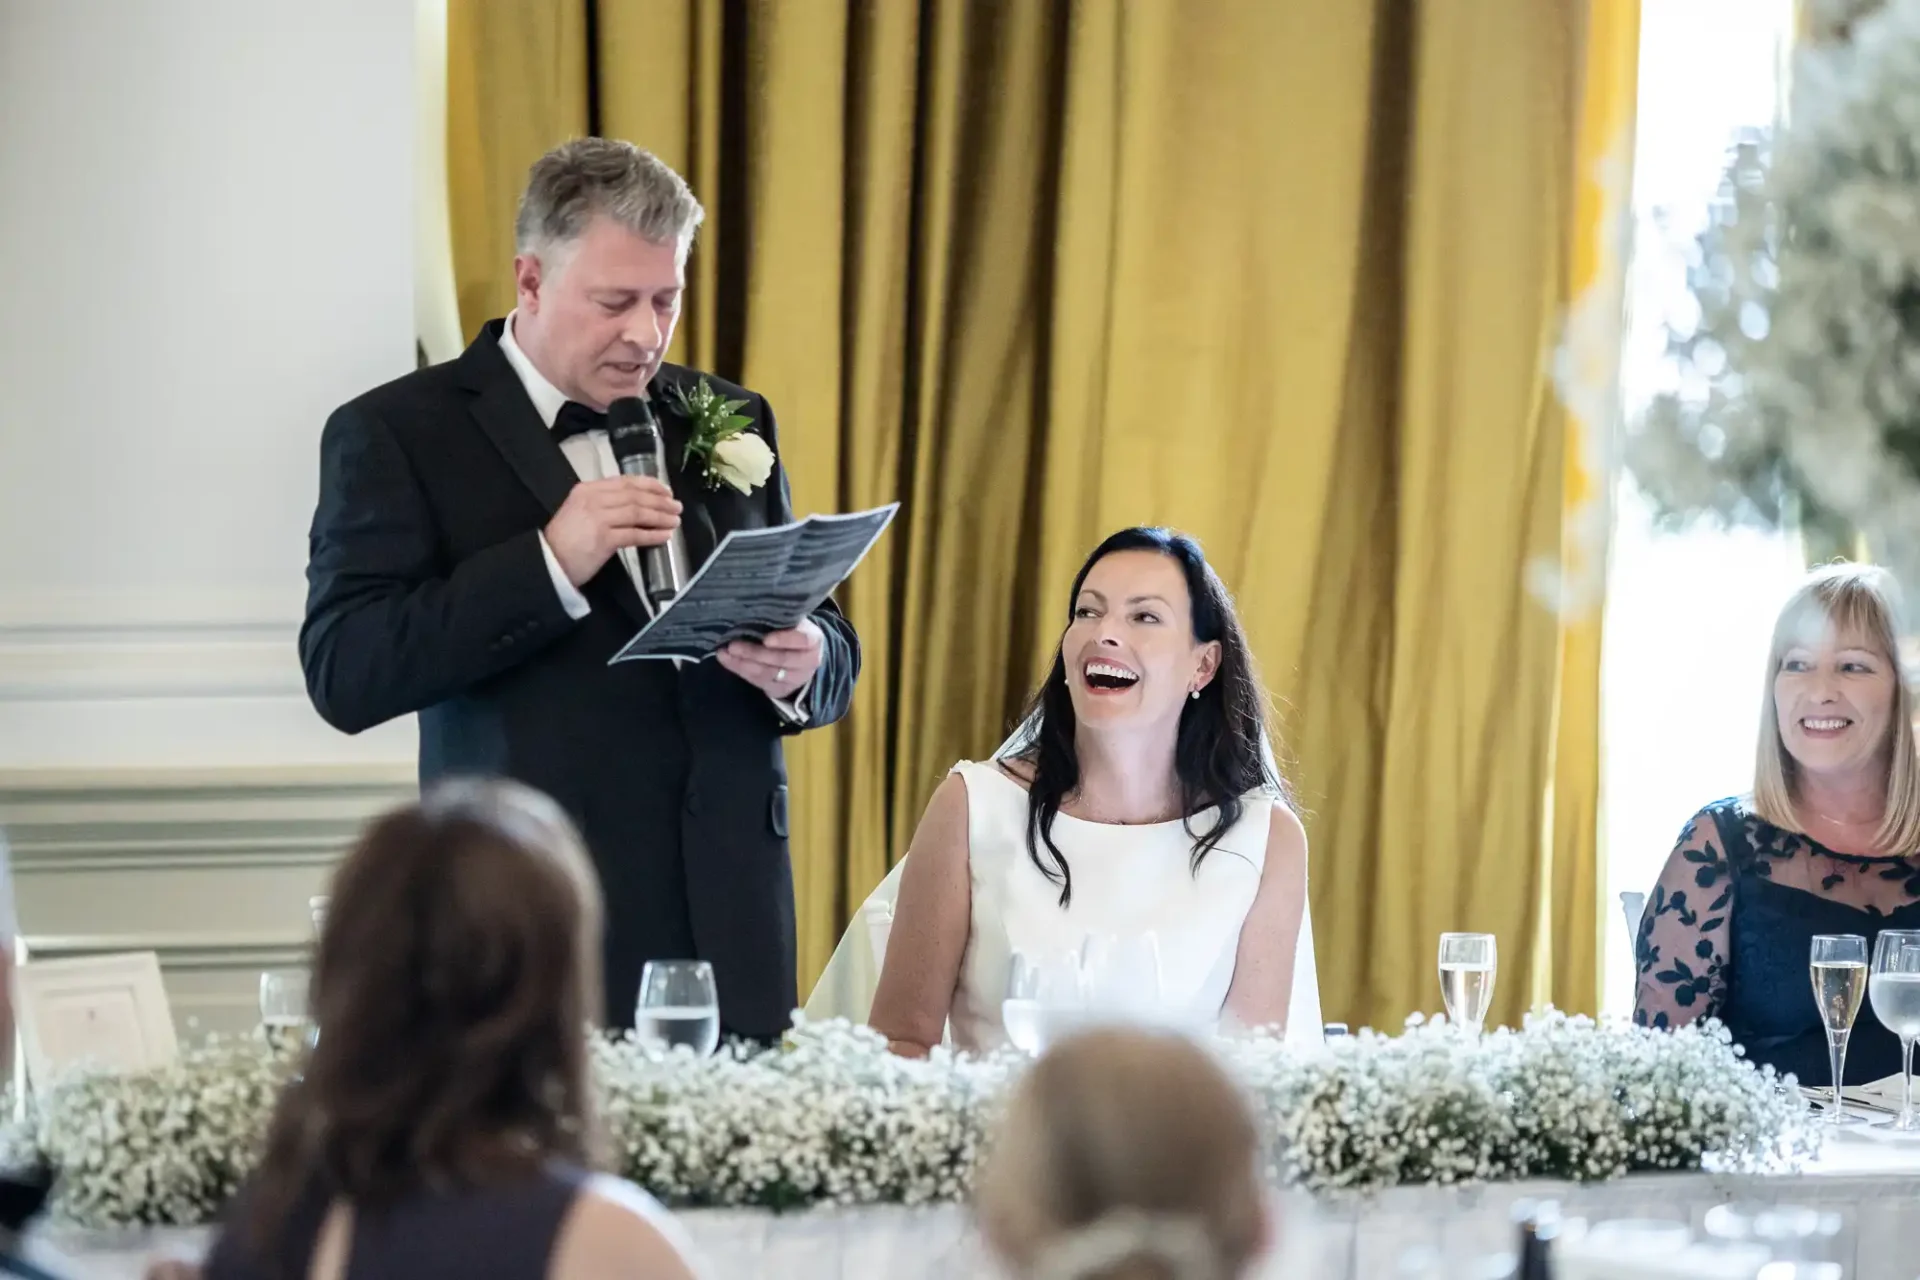 A man in a suit gives a speech holding papers at a wedding, eliciting laughter from the bride and other female guest seated at a decorated table.